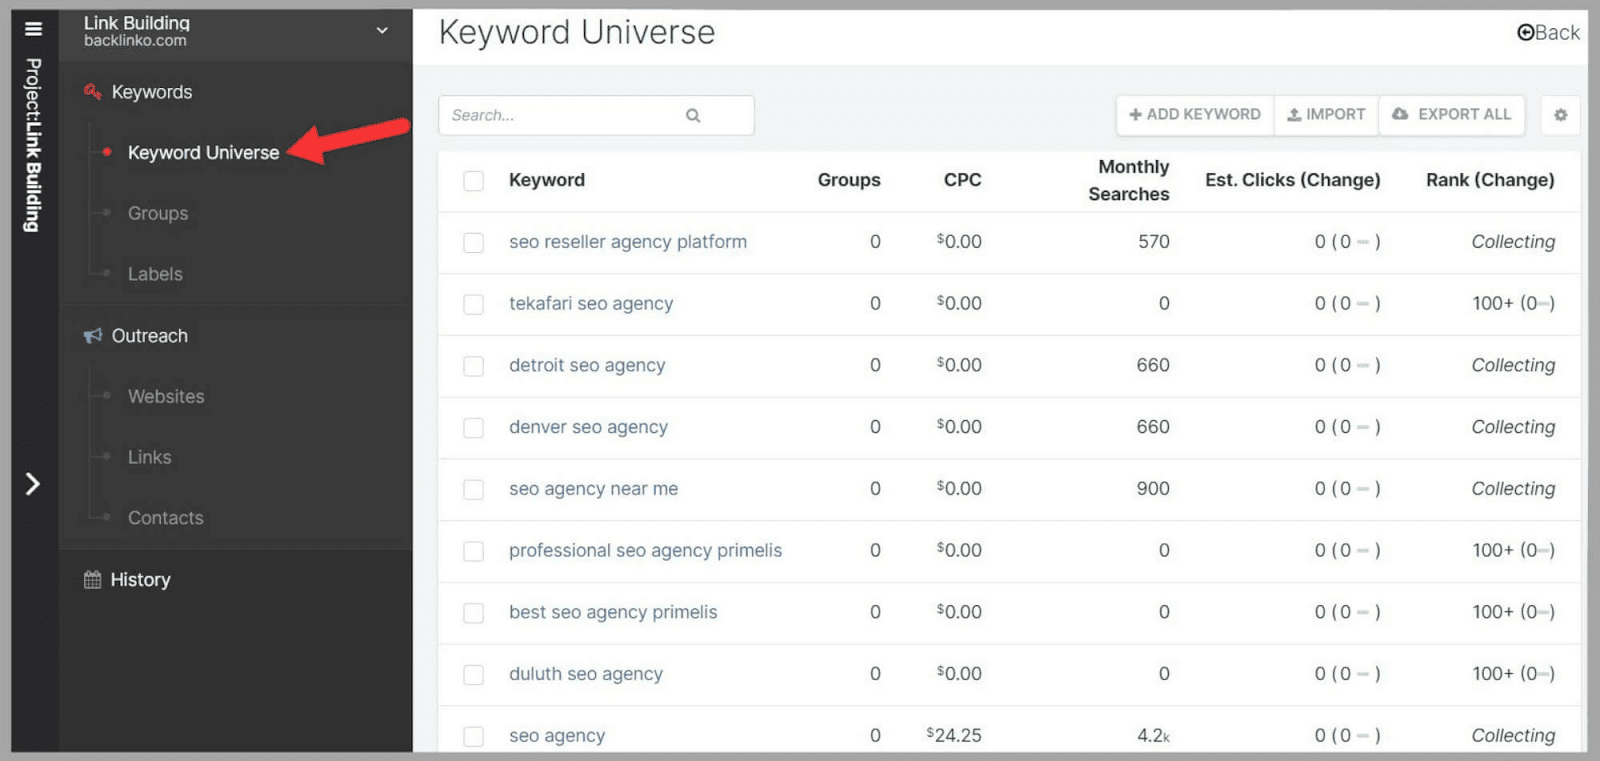 View your keywords on right side